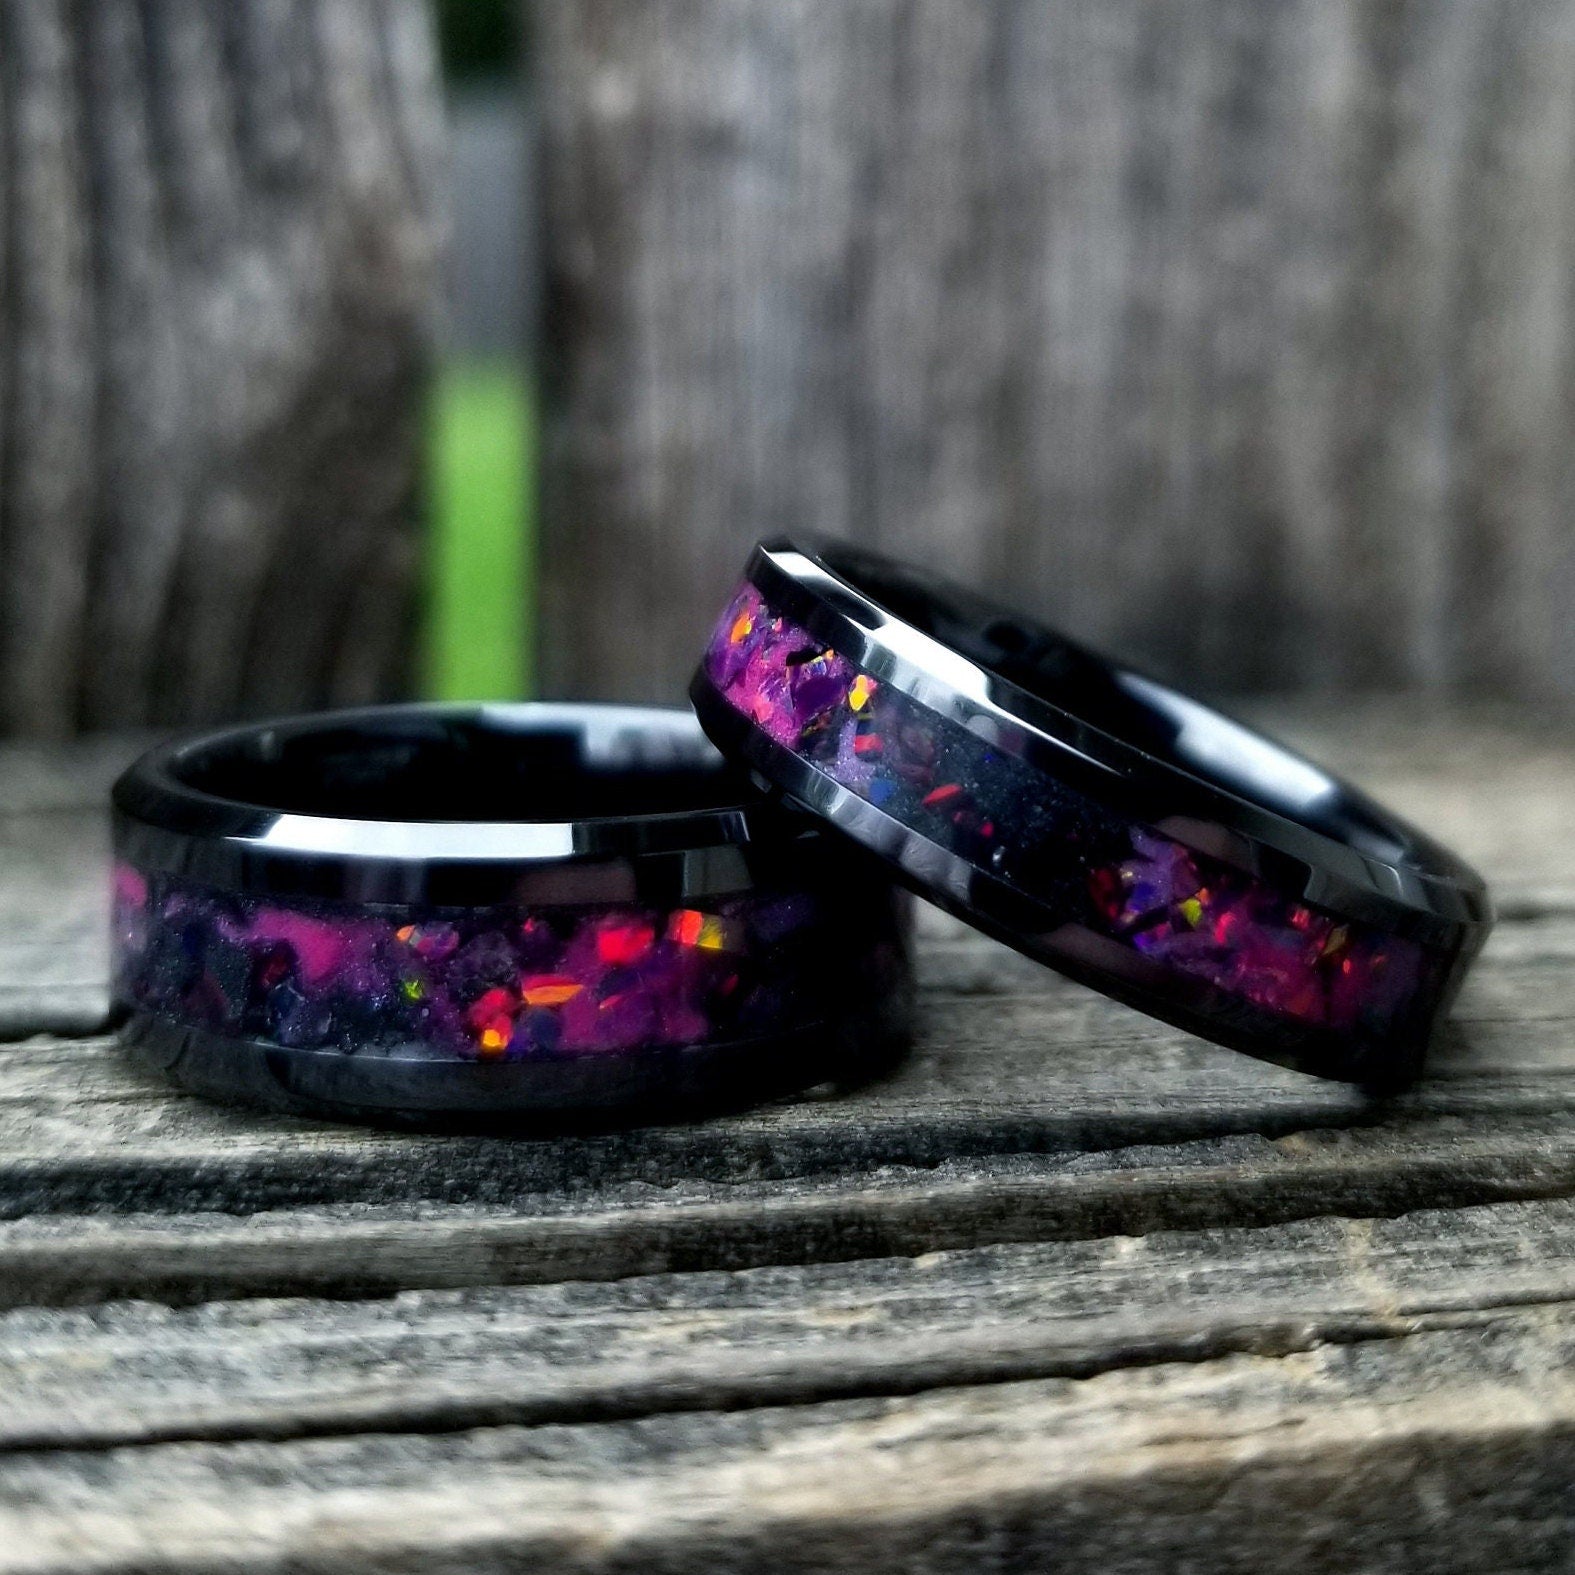 His & Hers Wedding Ring Set - Galaxy Fire Opal Ring - Black Ceramic Glow Ring with Ruby Red & Black Fire Opal Inlay - Sizes 5-13 - Orth Custom Rings